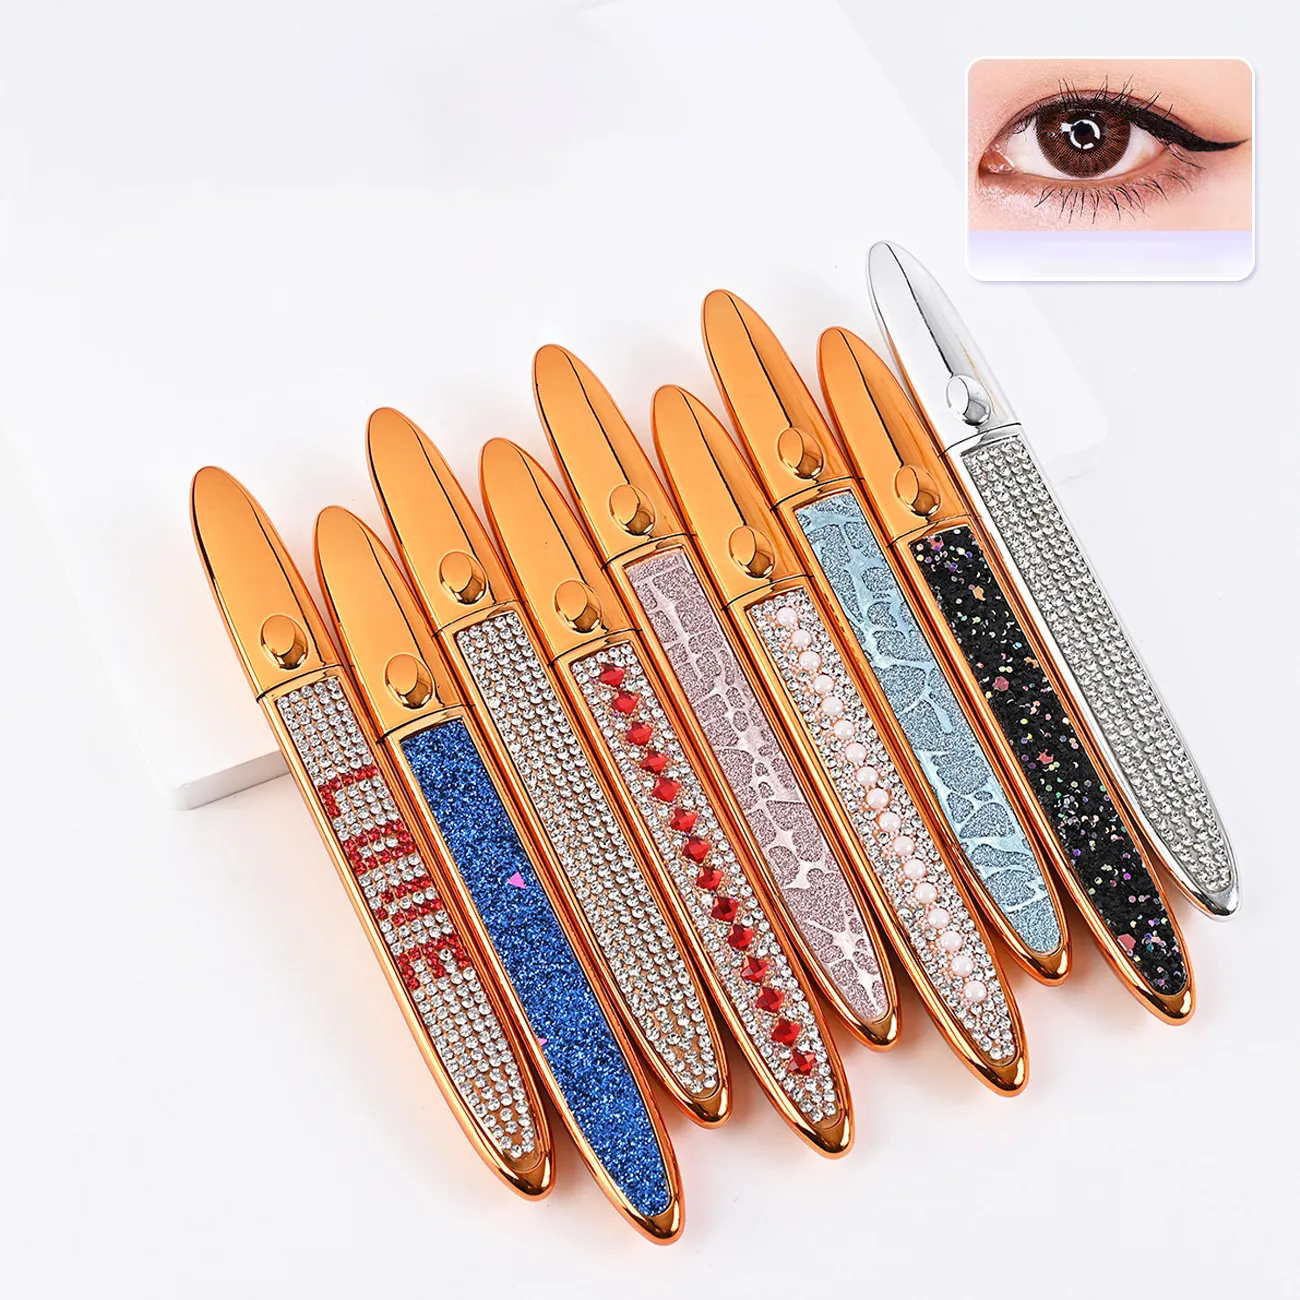 Waterproof diamond inlaid LOGO free stain resistant durable fast drying sticky black eyeliner pen